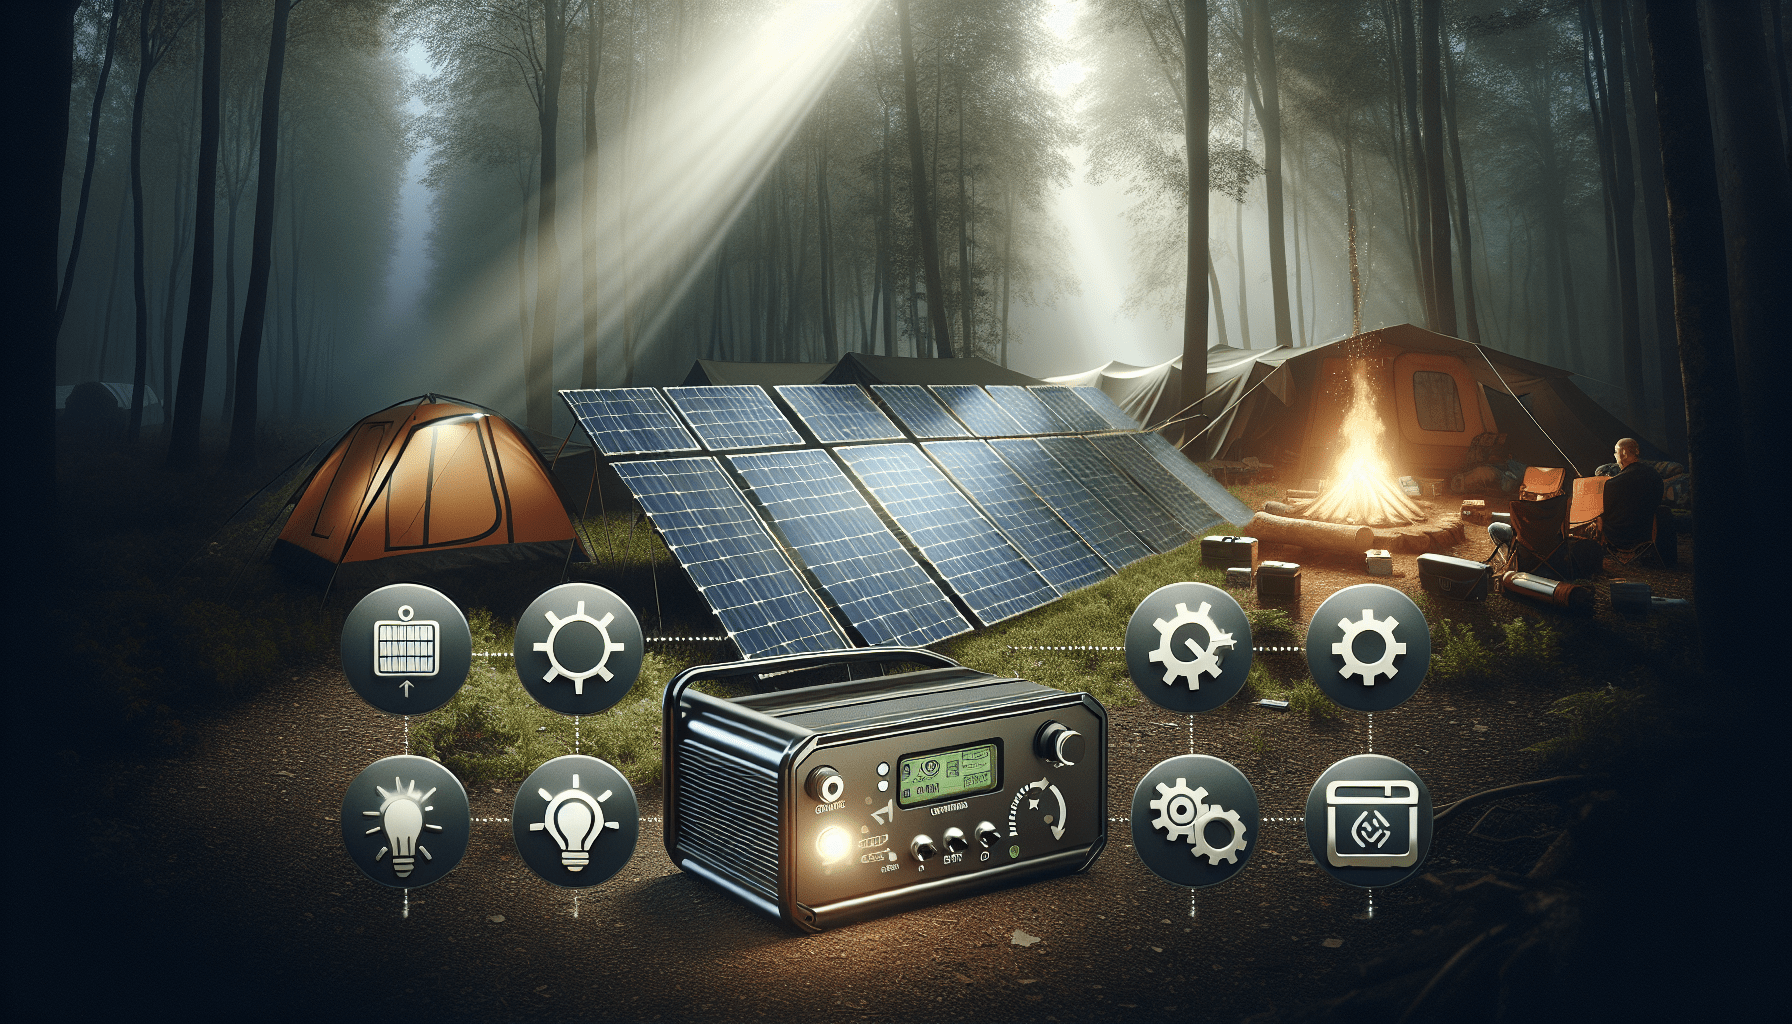 What Are The Latest Innovations In Solar Technology For Preppers?